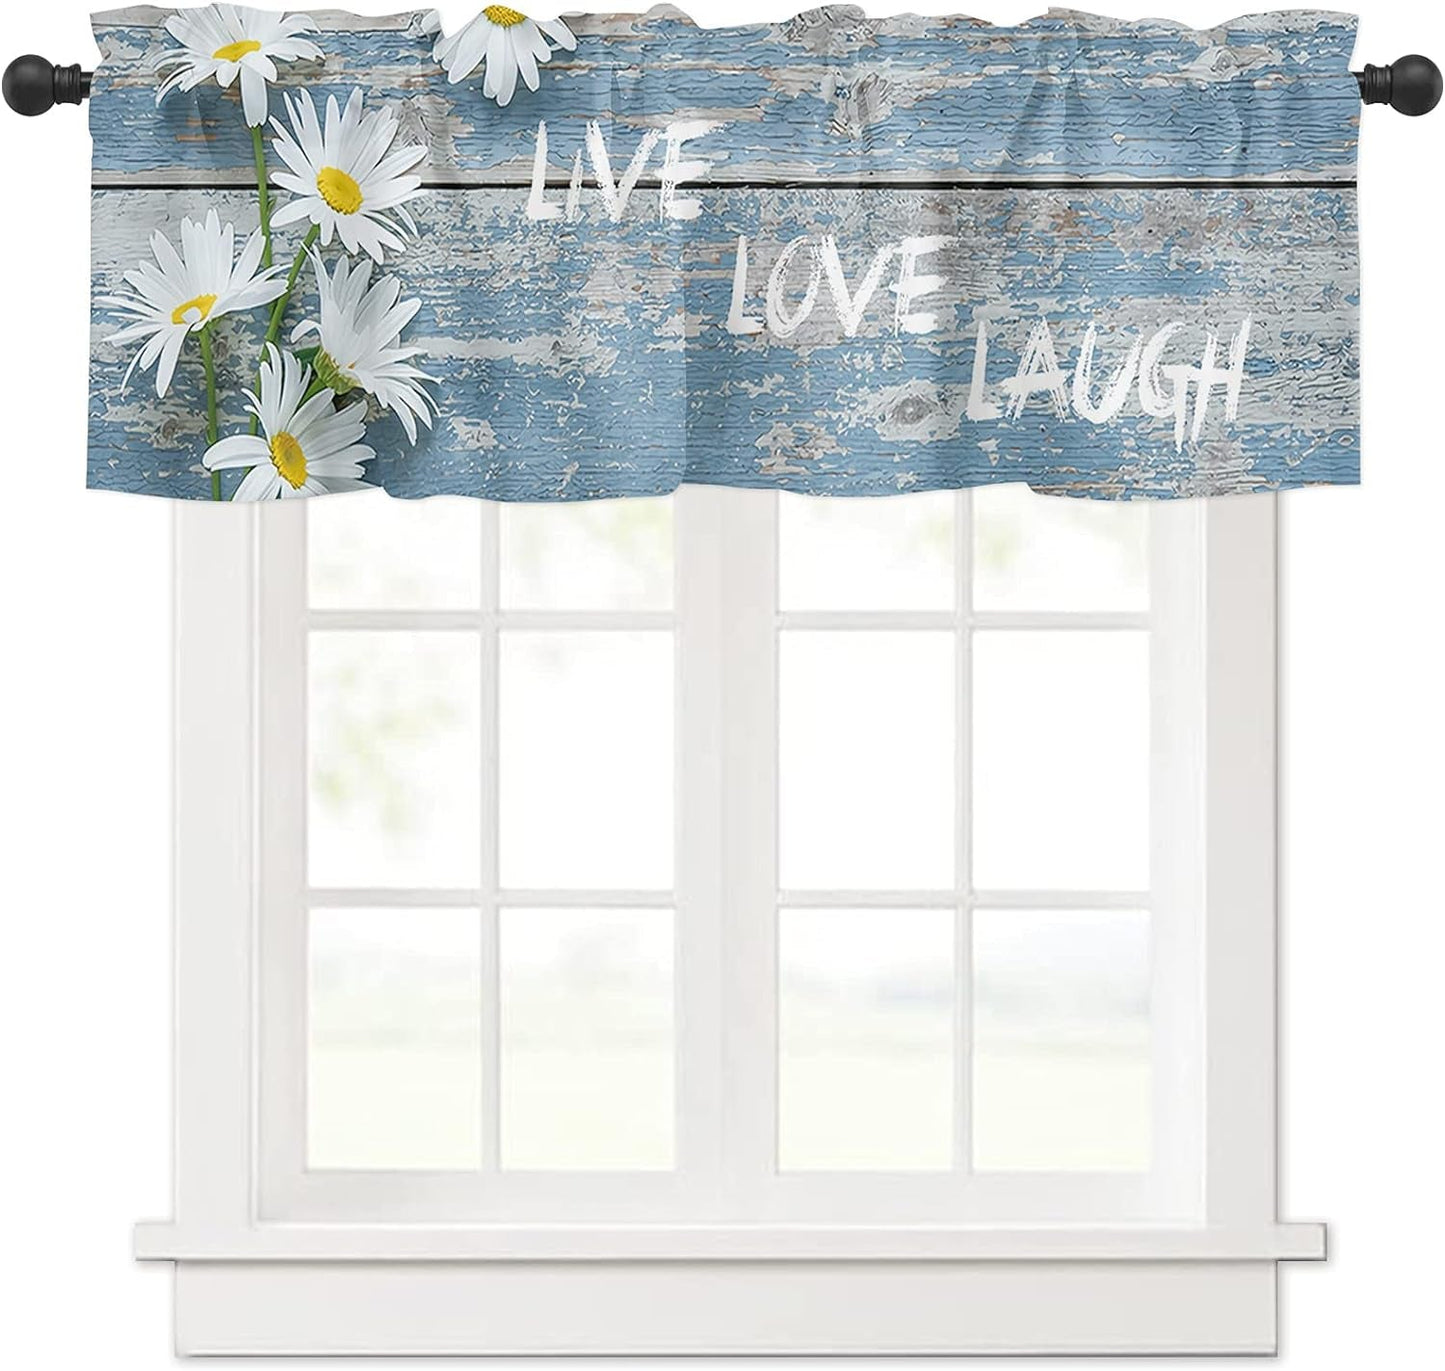 54X18 Inch Curtain Valance Farm House Polyester Valances for Home Decor with Rod Pocket, Window Drape for Girls Bedroom Kitchen Dorm Bathroom Decoration Watercolor Rooster and Sunflowers